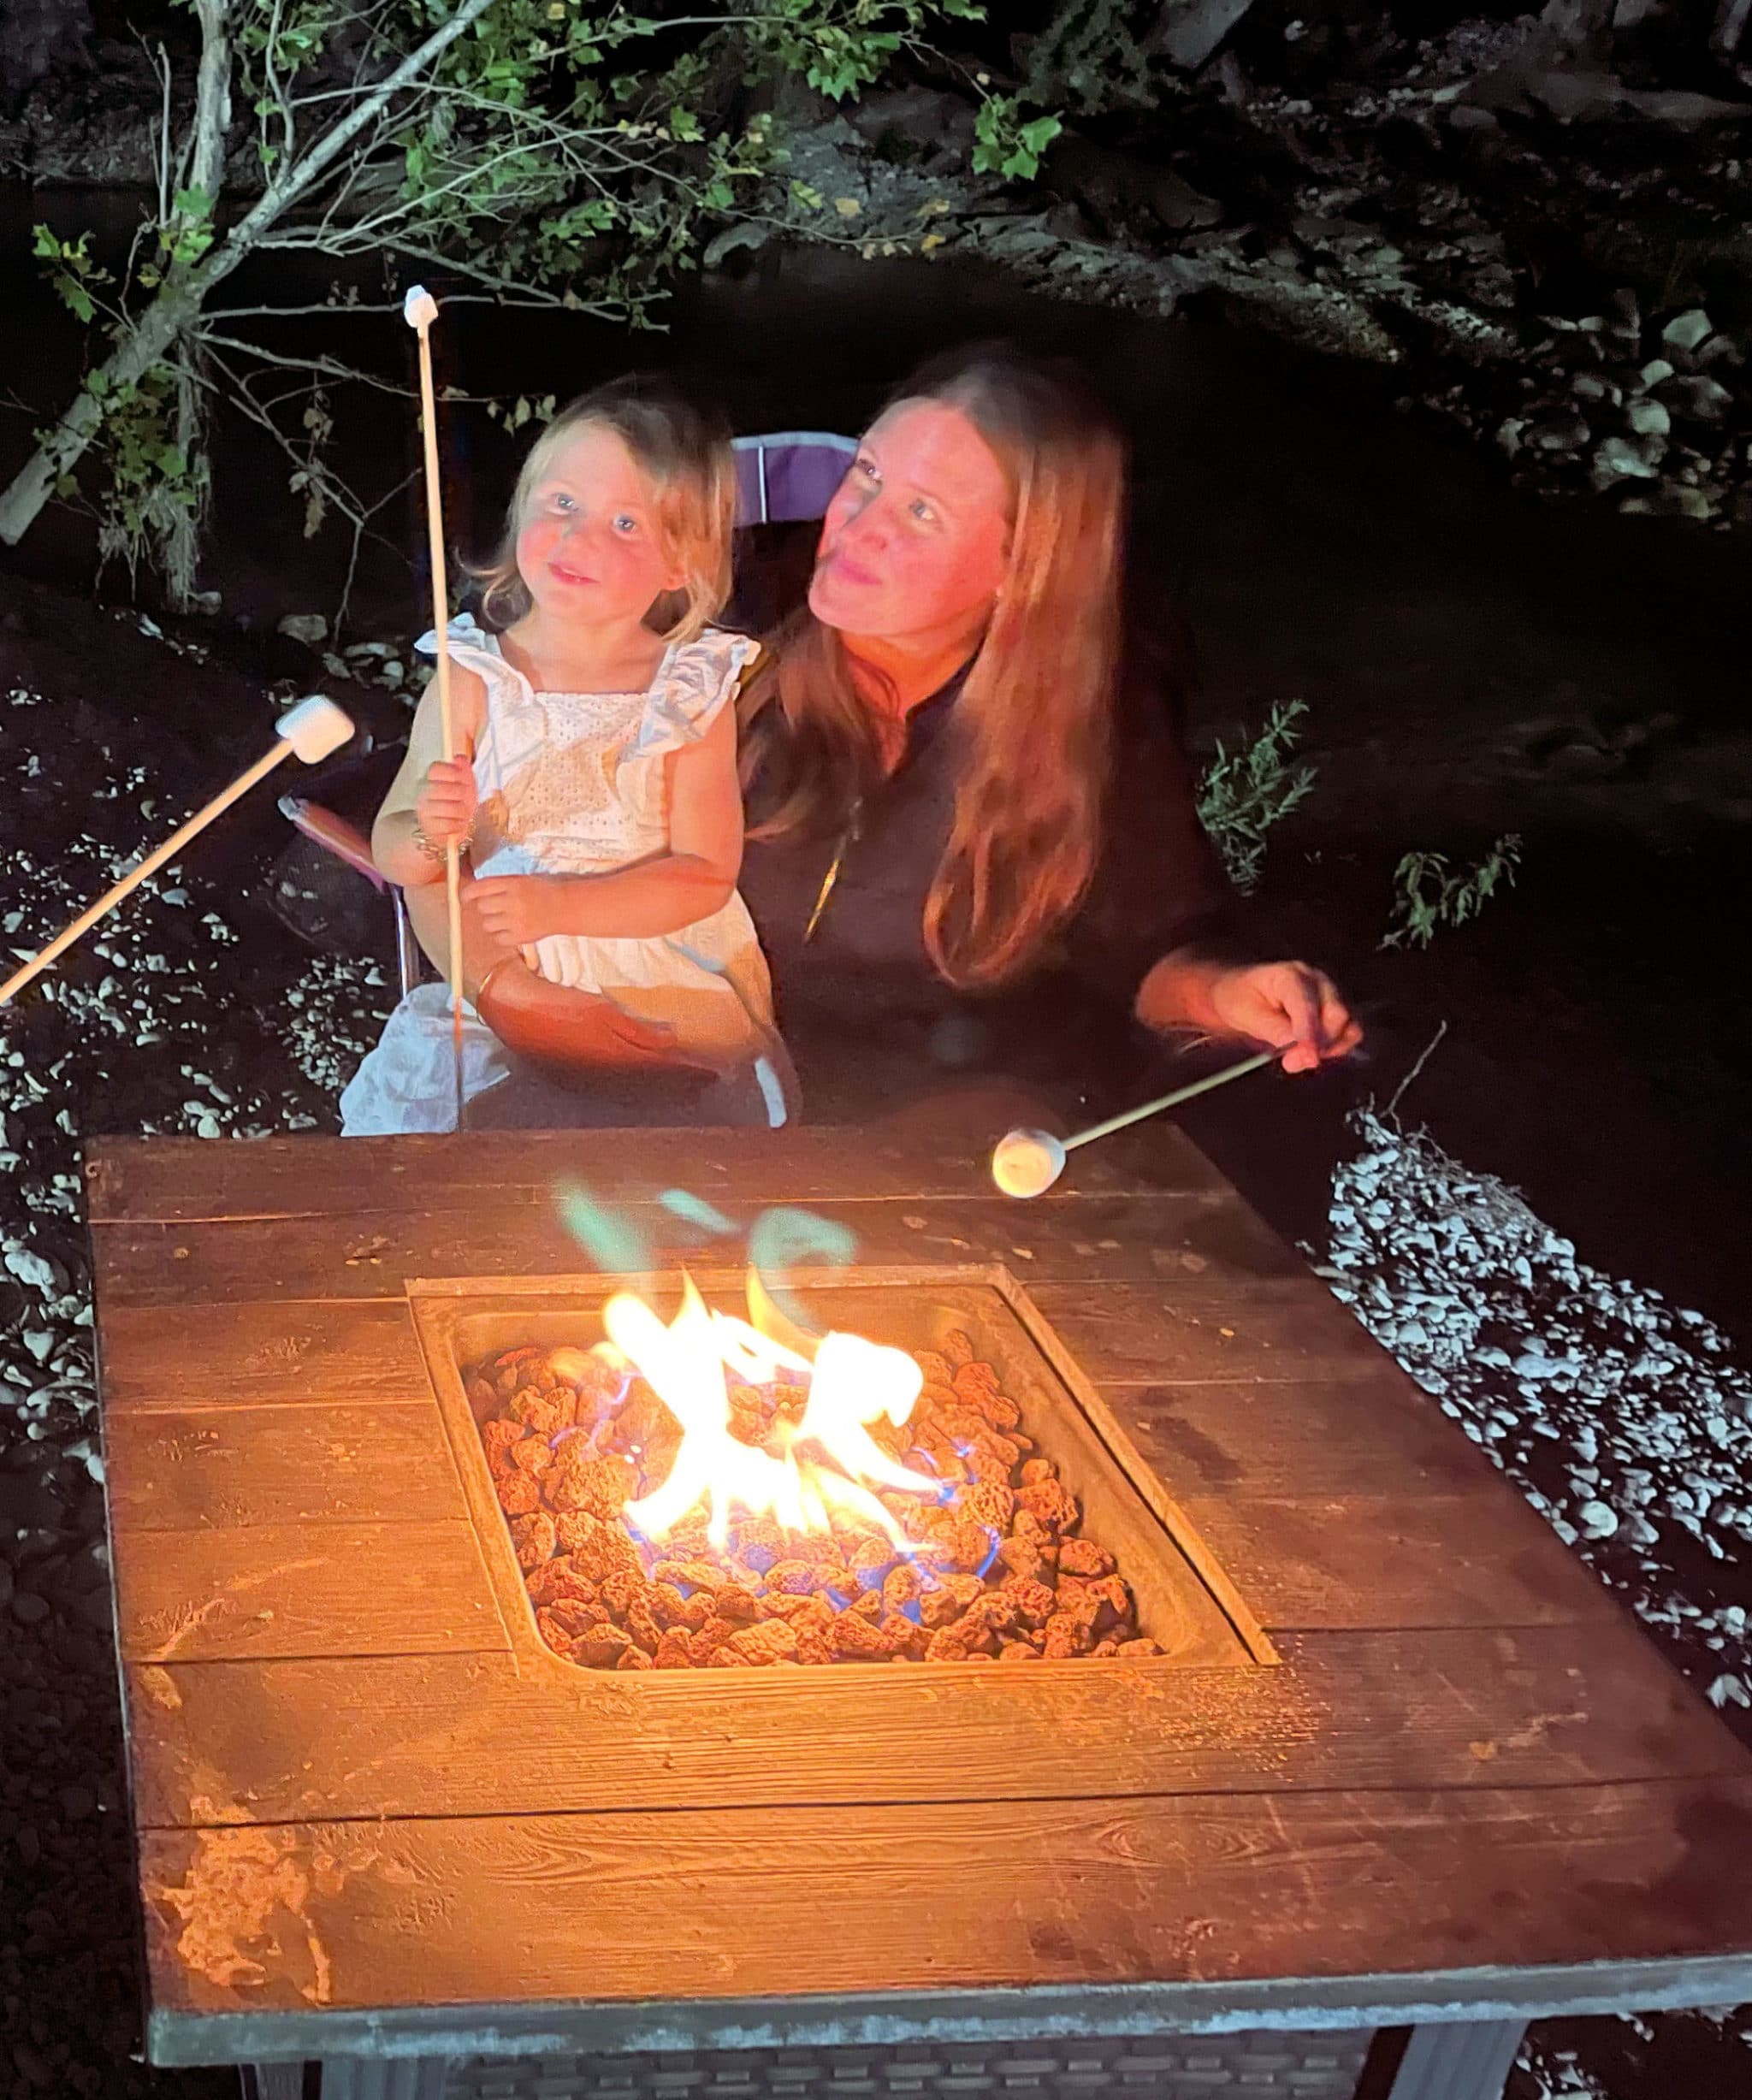 Mom and daughter roasting marshmallows at a campfire